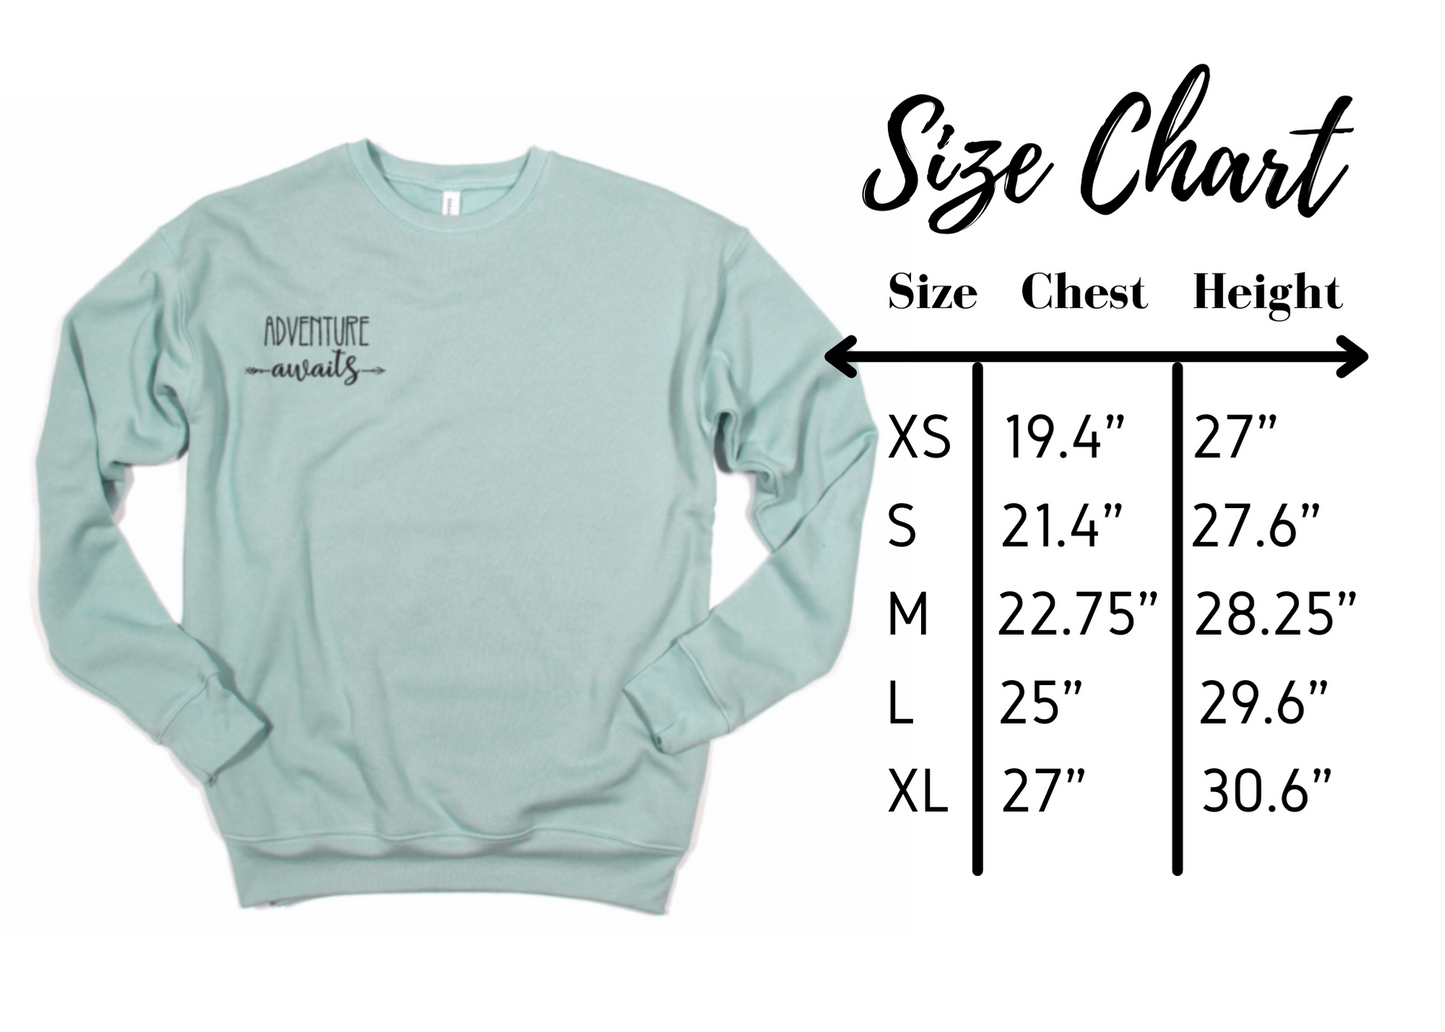 Sunshine Mixed with a little Sarcasm Crewneck Sweater